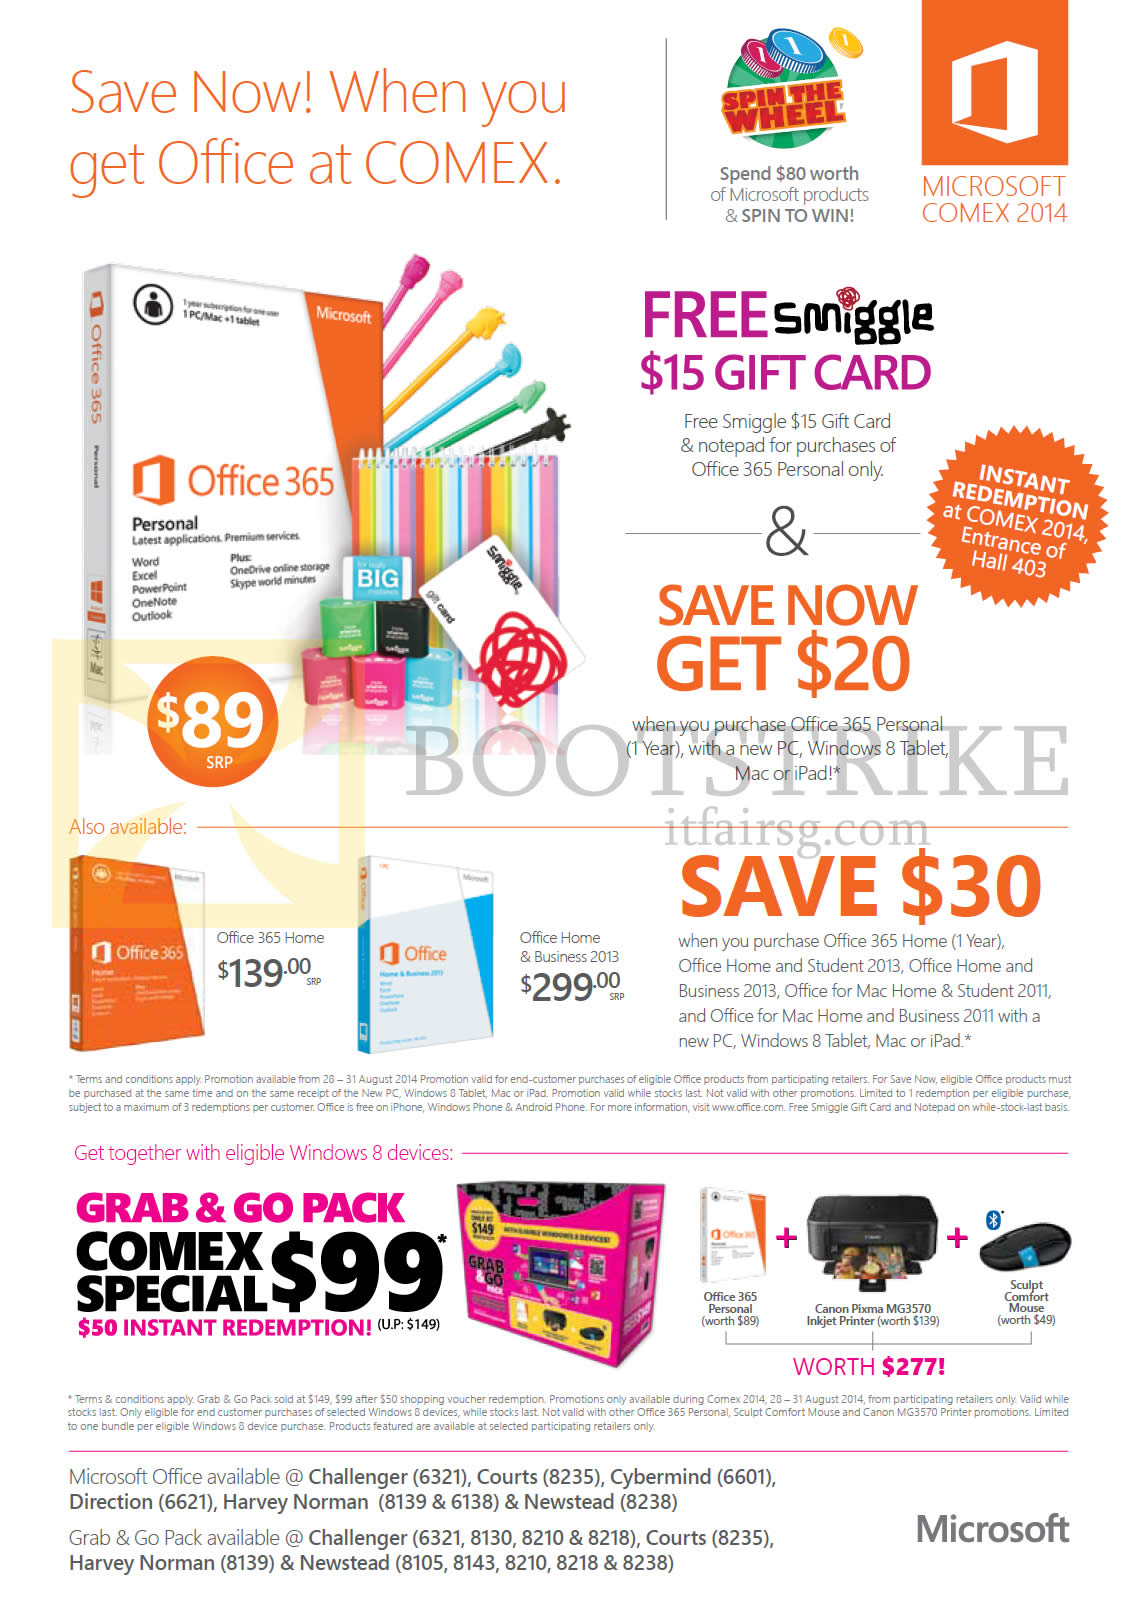 COMEX 2014 price list image brochure of Microsoft Office 365 Home, Office Home N Business 2013, Windows 8 Devices Grab N Go Pack